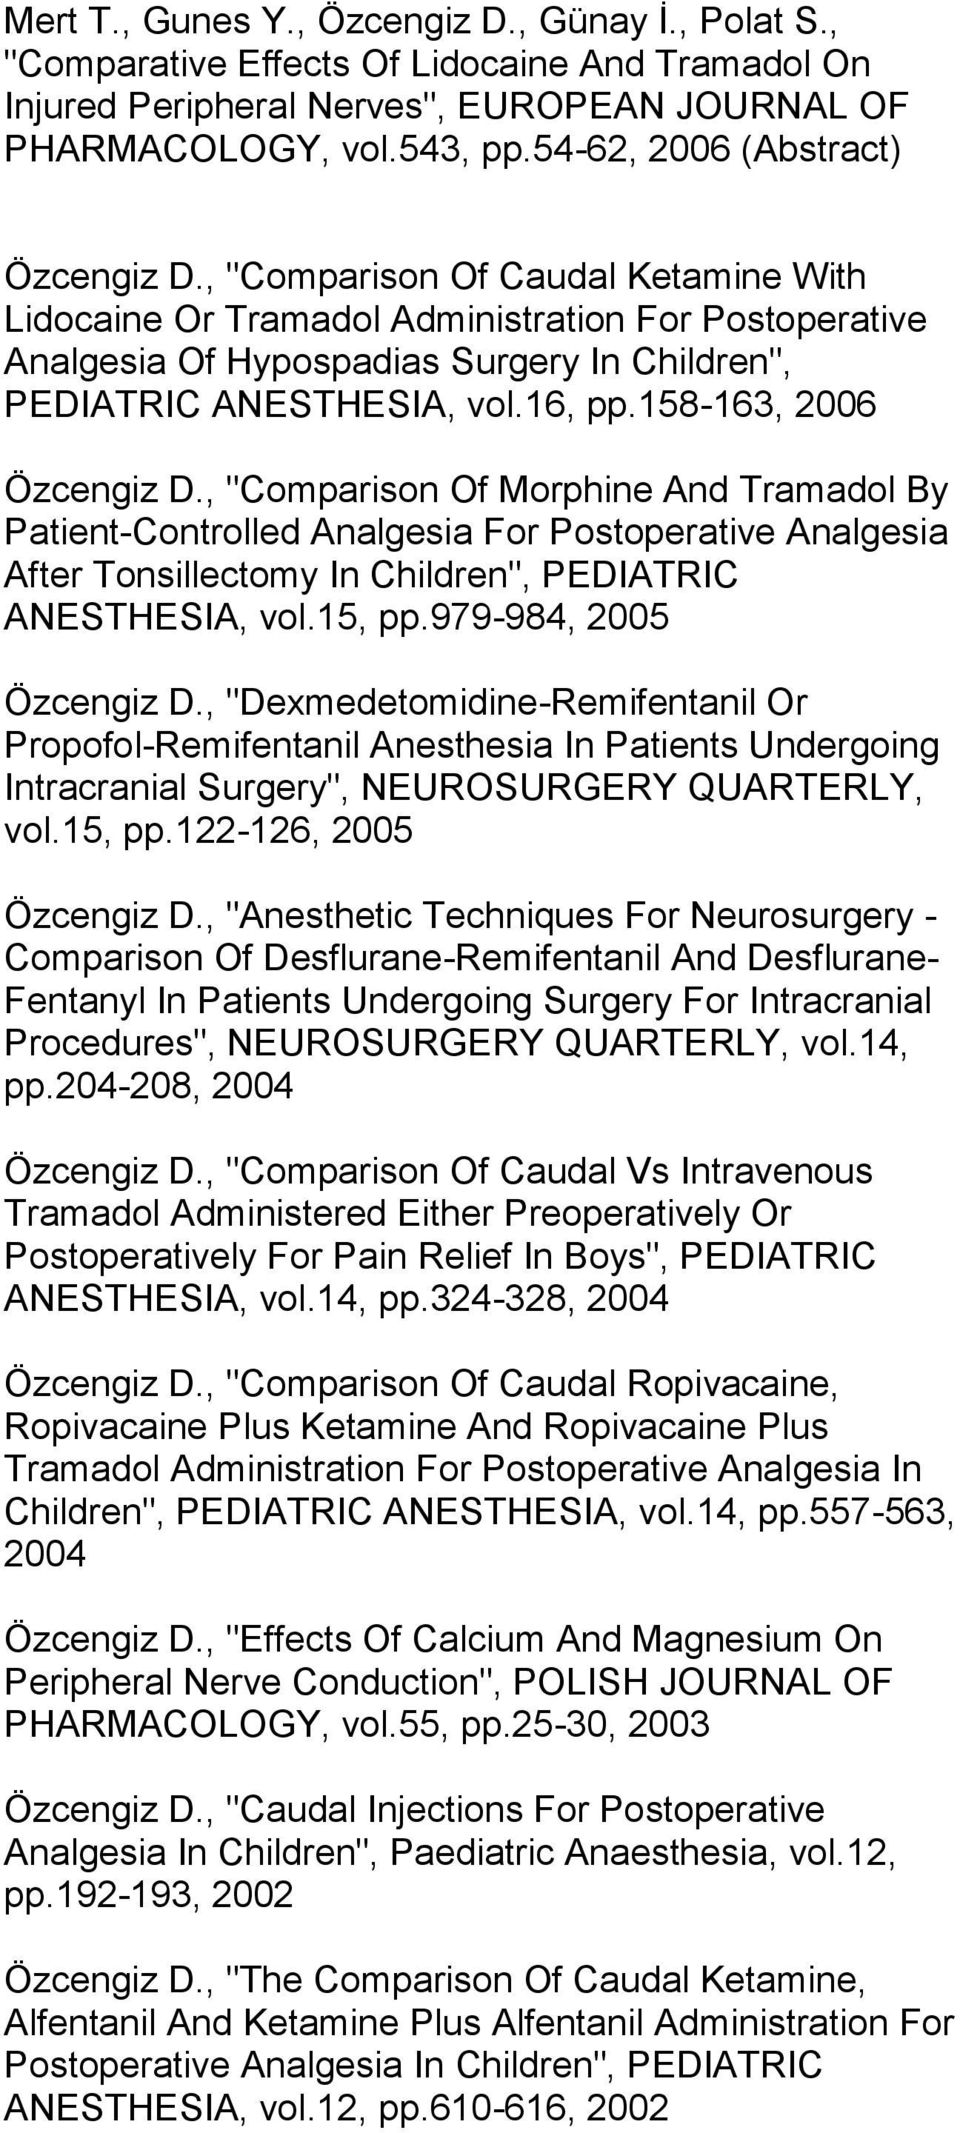 16, pp.158-163, 2006 Özcengiz D., "Comparison Of Morphine And Tramadol By Patient-Controlled Analgesia For Postoperative Analgesia After Tonsillectomy In Children", PEDIATRIC ANESTHESIA, vol.15, pp.